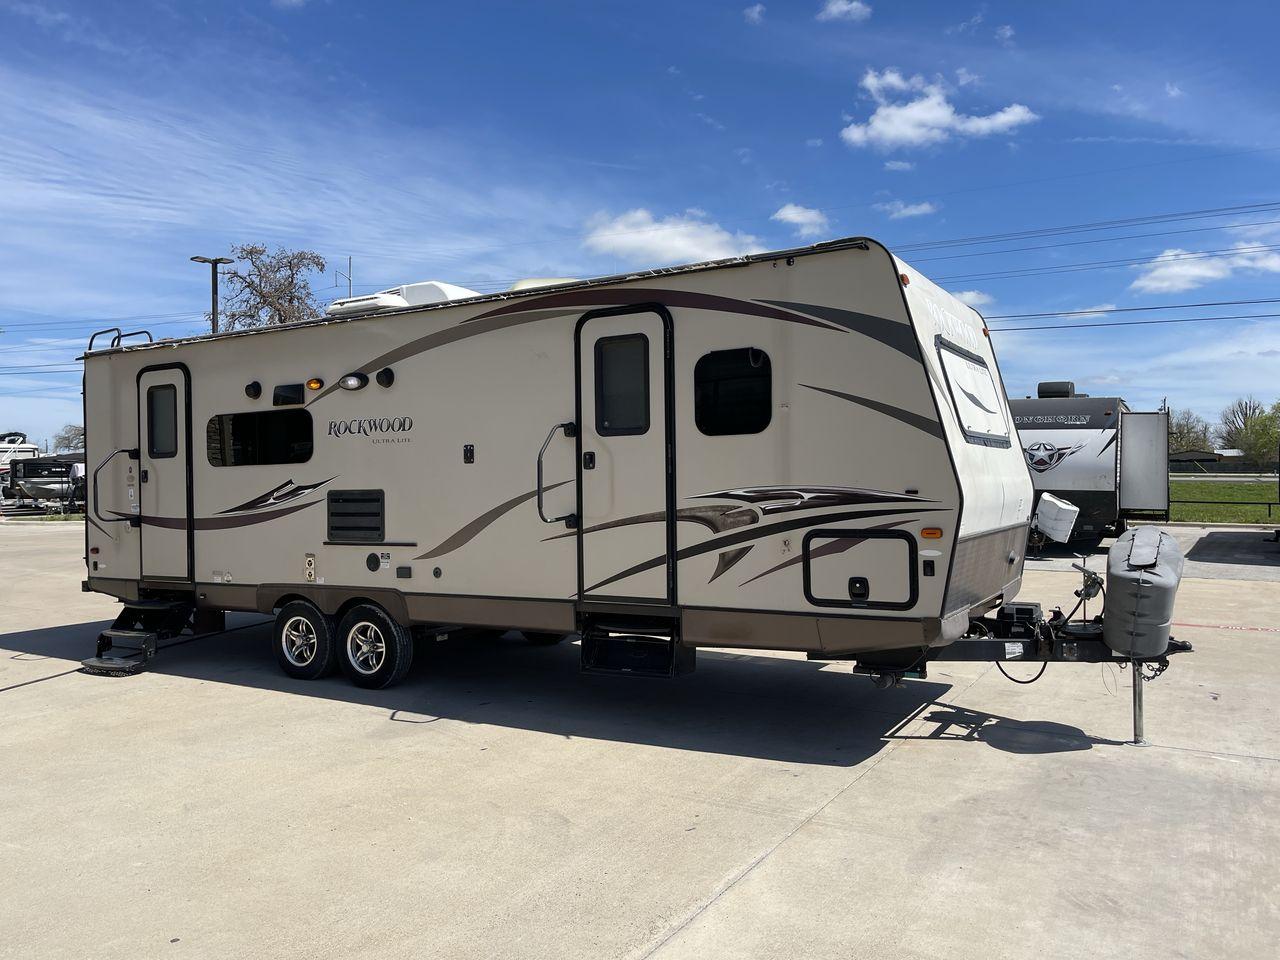 2014 FOREST RIVER ROCKWOOD 2604WS (4X4TRLB26ED) , Length: 29.67 ft. | Dry Weight: 5,665 lbs. | Slides: 2 transmission, located at 4319 N Main St, Cleburne, TX, 76033, (817) 678-5133, 32.385960, -97.391212 - Looking for a lightweight, fully-equipped travel trailer under 30 feet? Check out this 2014 Forest River Rockwood 2604WS! This trailer measures exactly 29.67 ft. in length and 9.58 ft. in height. It has a dry weight of 5,665 lbs. and a manageable hitch weight of 711 lbs. It includes two slides and a - Photo #23